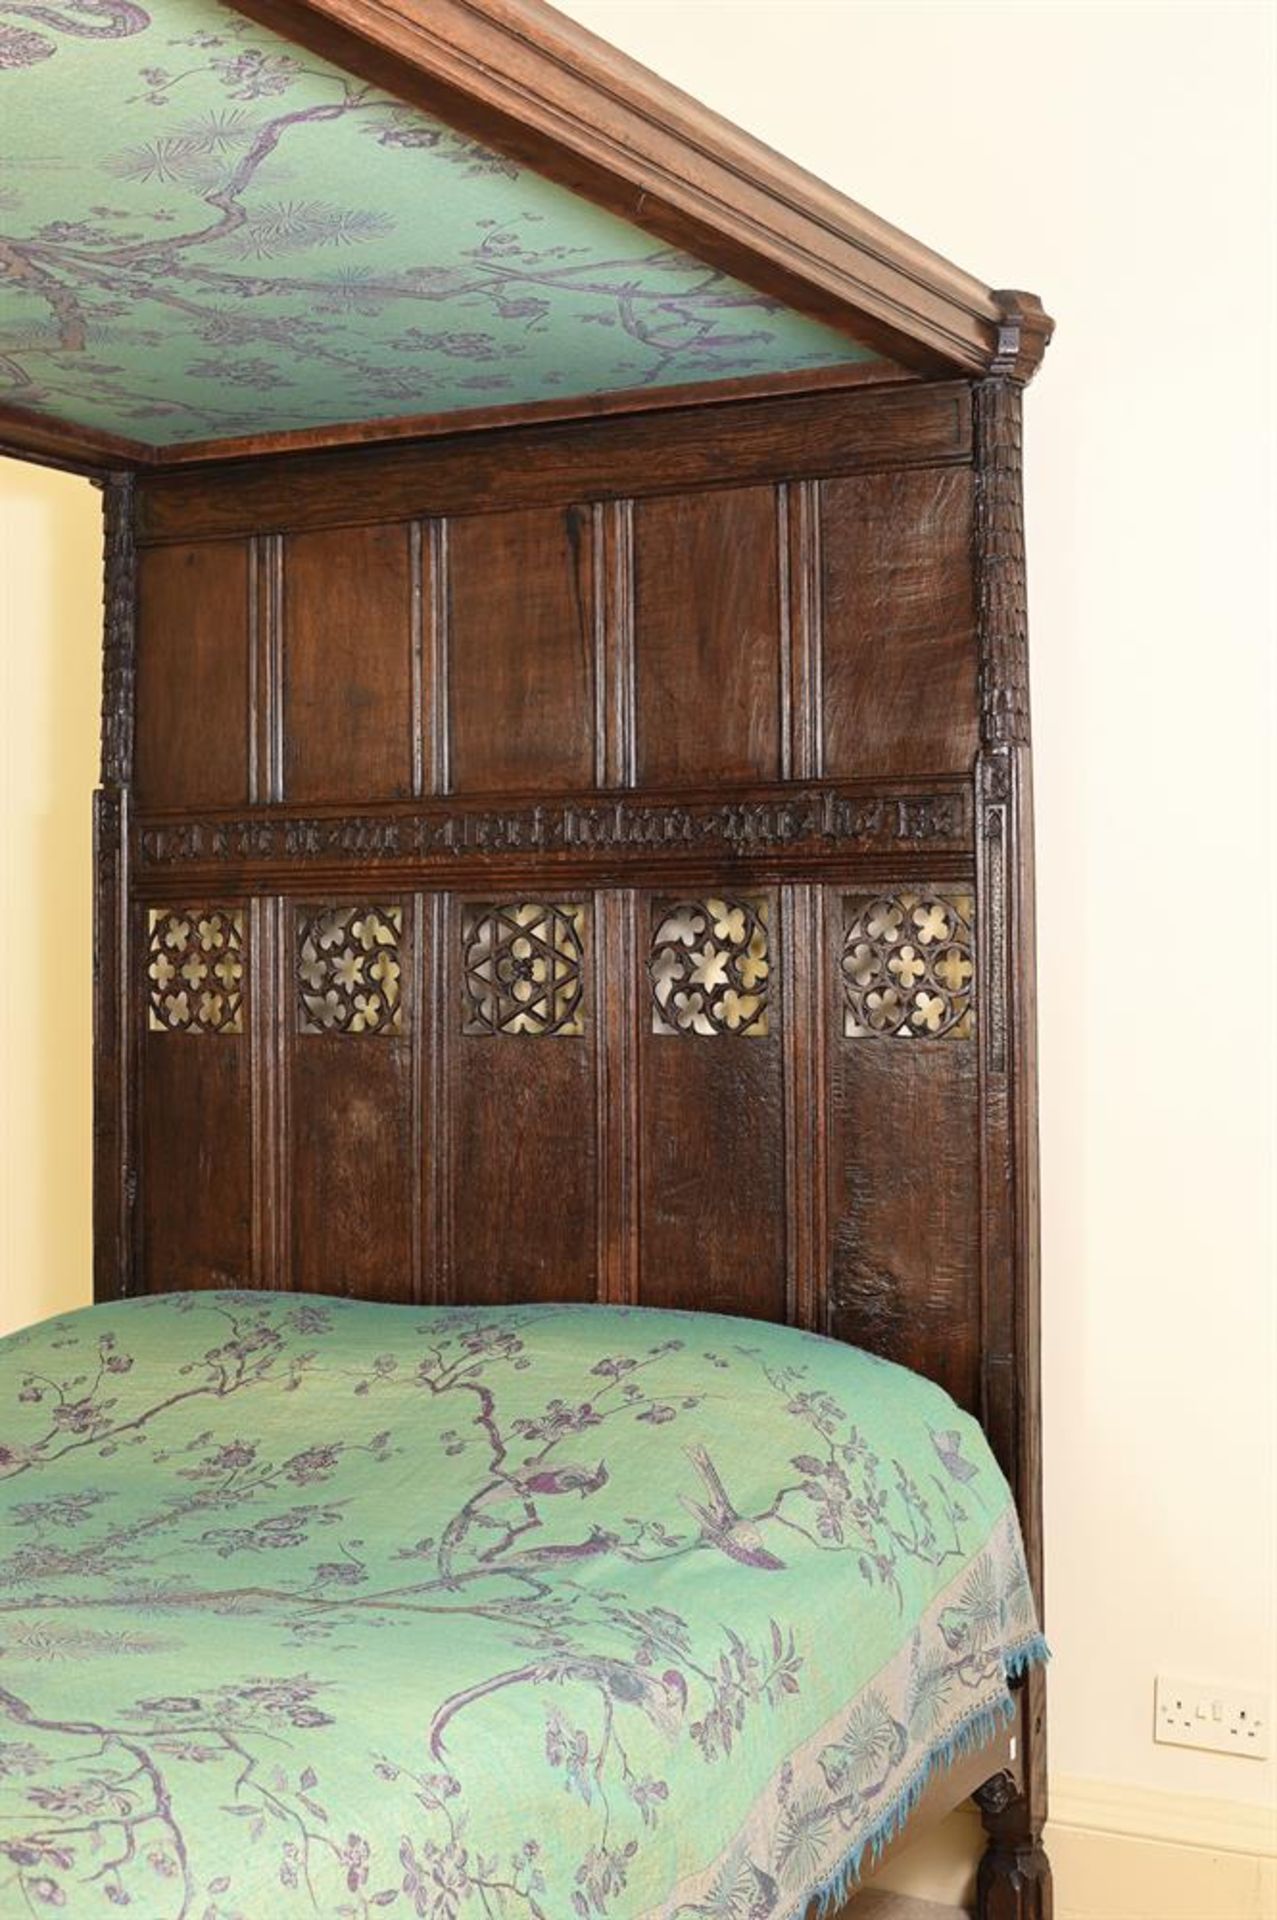 A CARVED OAK TESTER BED, POSSIBLY LATE 15TH CENTURY AND LATER ELEMENTS - Image 3 of 6